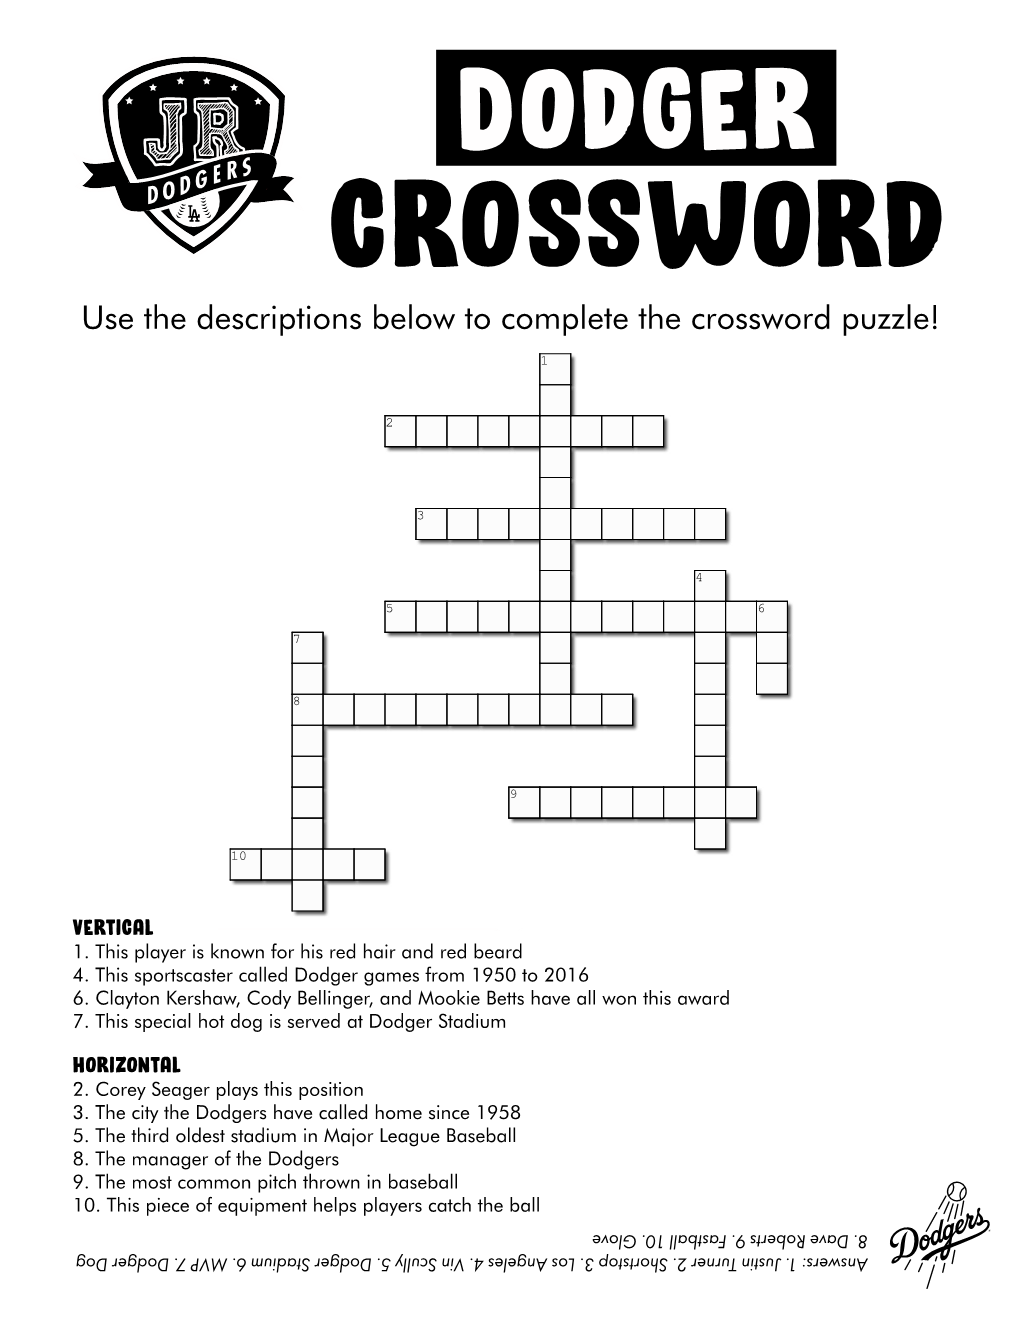 Use the Descriptions Below to Complete the Crossword Puzzle!